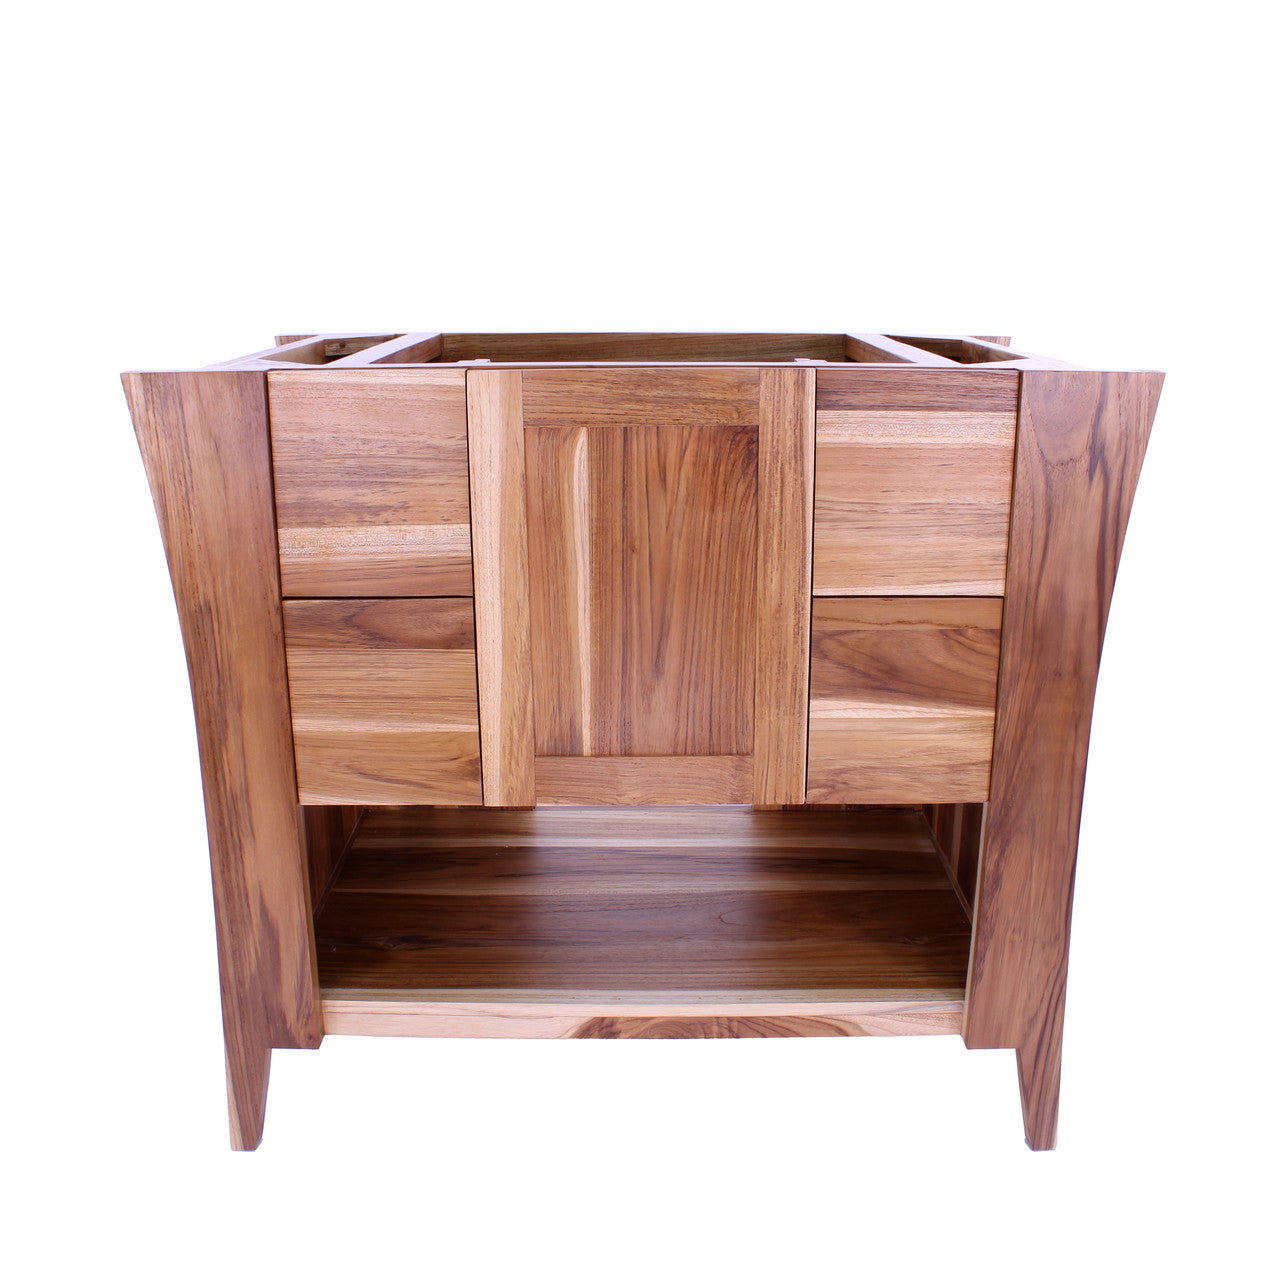 EcoDecors Significado 36 in. L Teak Vanity Cabinet Only in Natural Teak  ST-BT-36-1 - The Home Depot